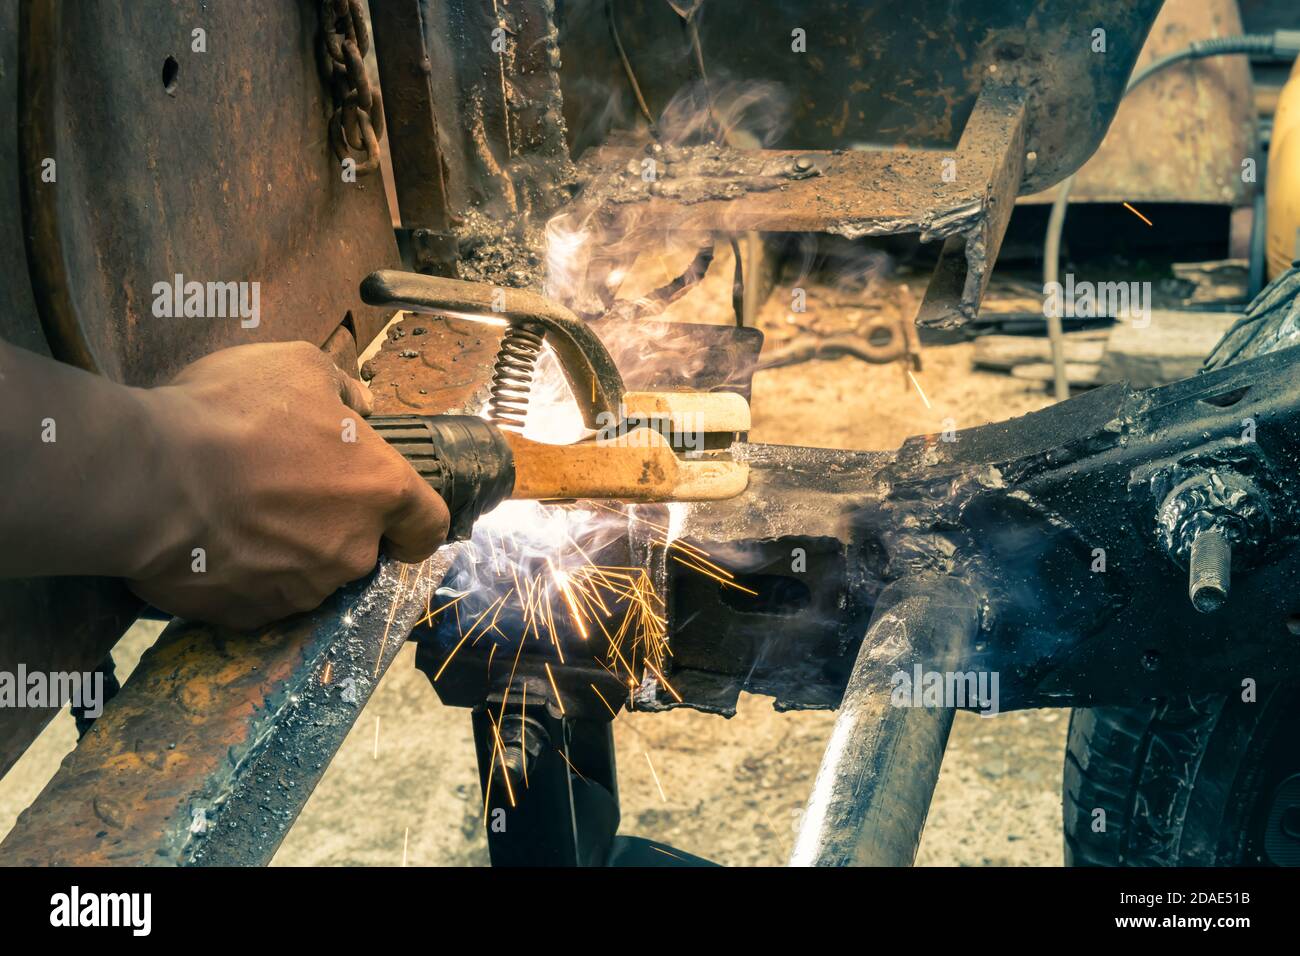 Welder Welding Rear Car Chassis by Electrode Arc Welding Technique by Torch in Vintage Tone Stock Photo